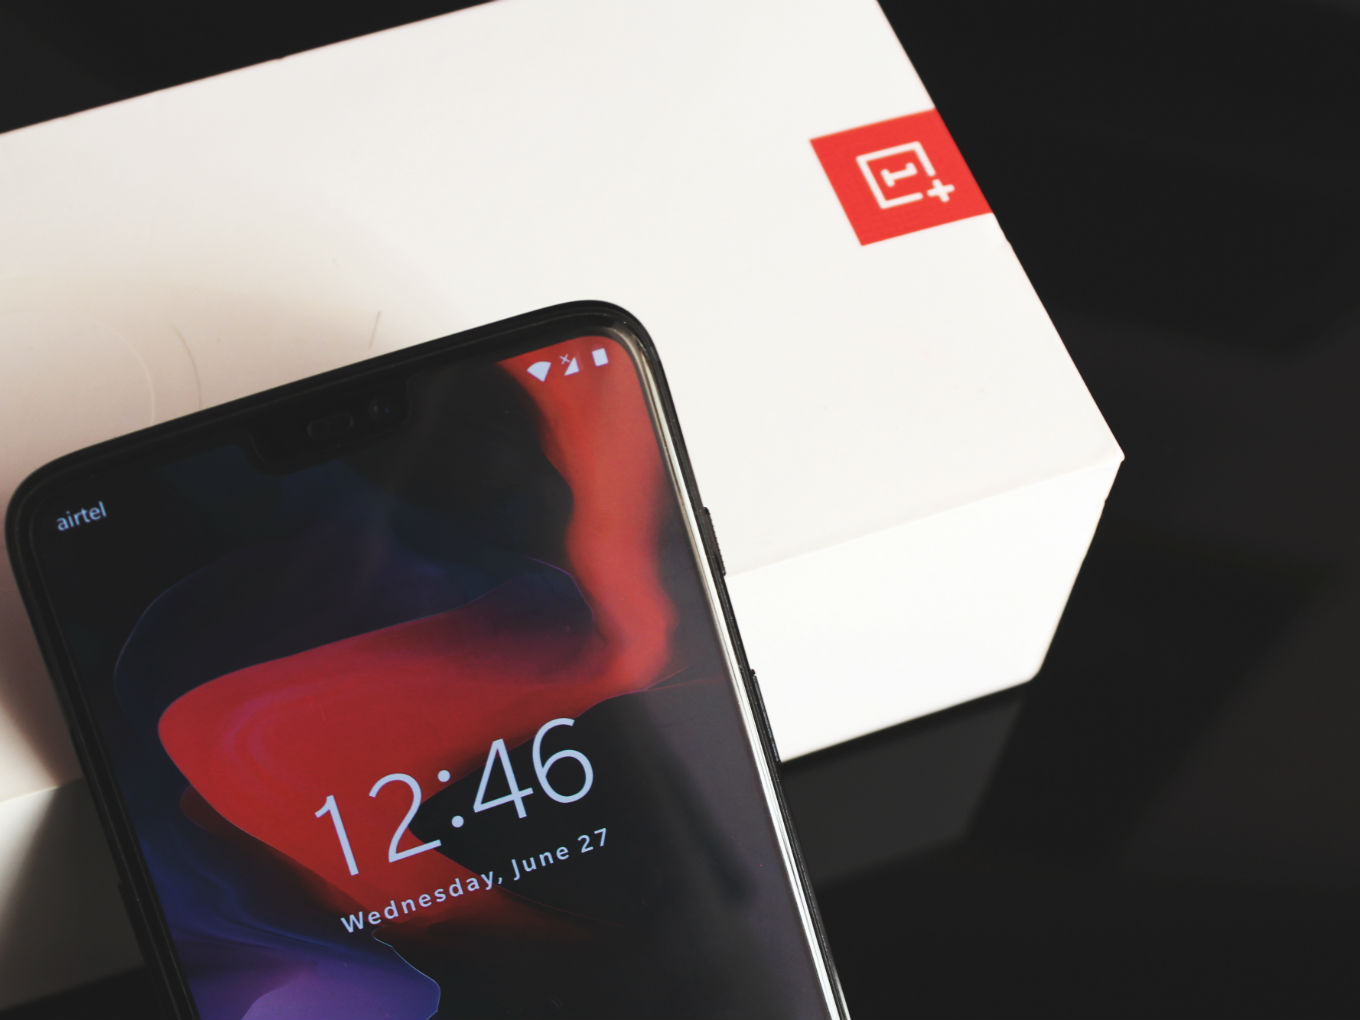 OnePlus Will Invest INR 1000 Cr In India Over The Next Three Years